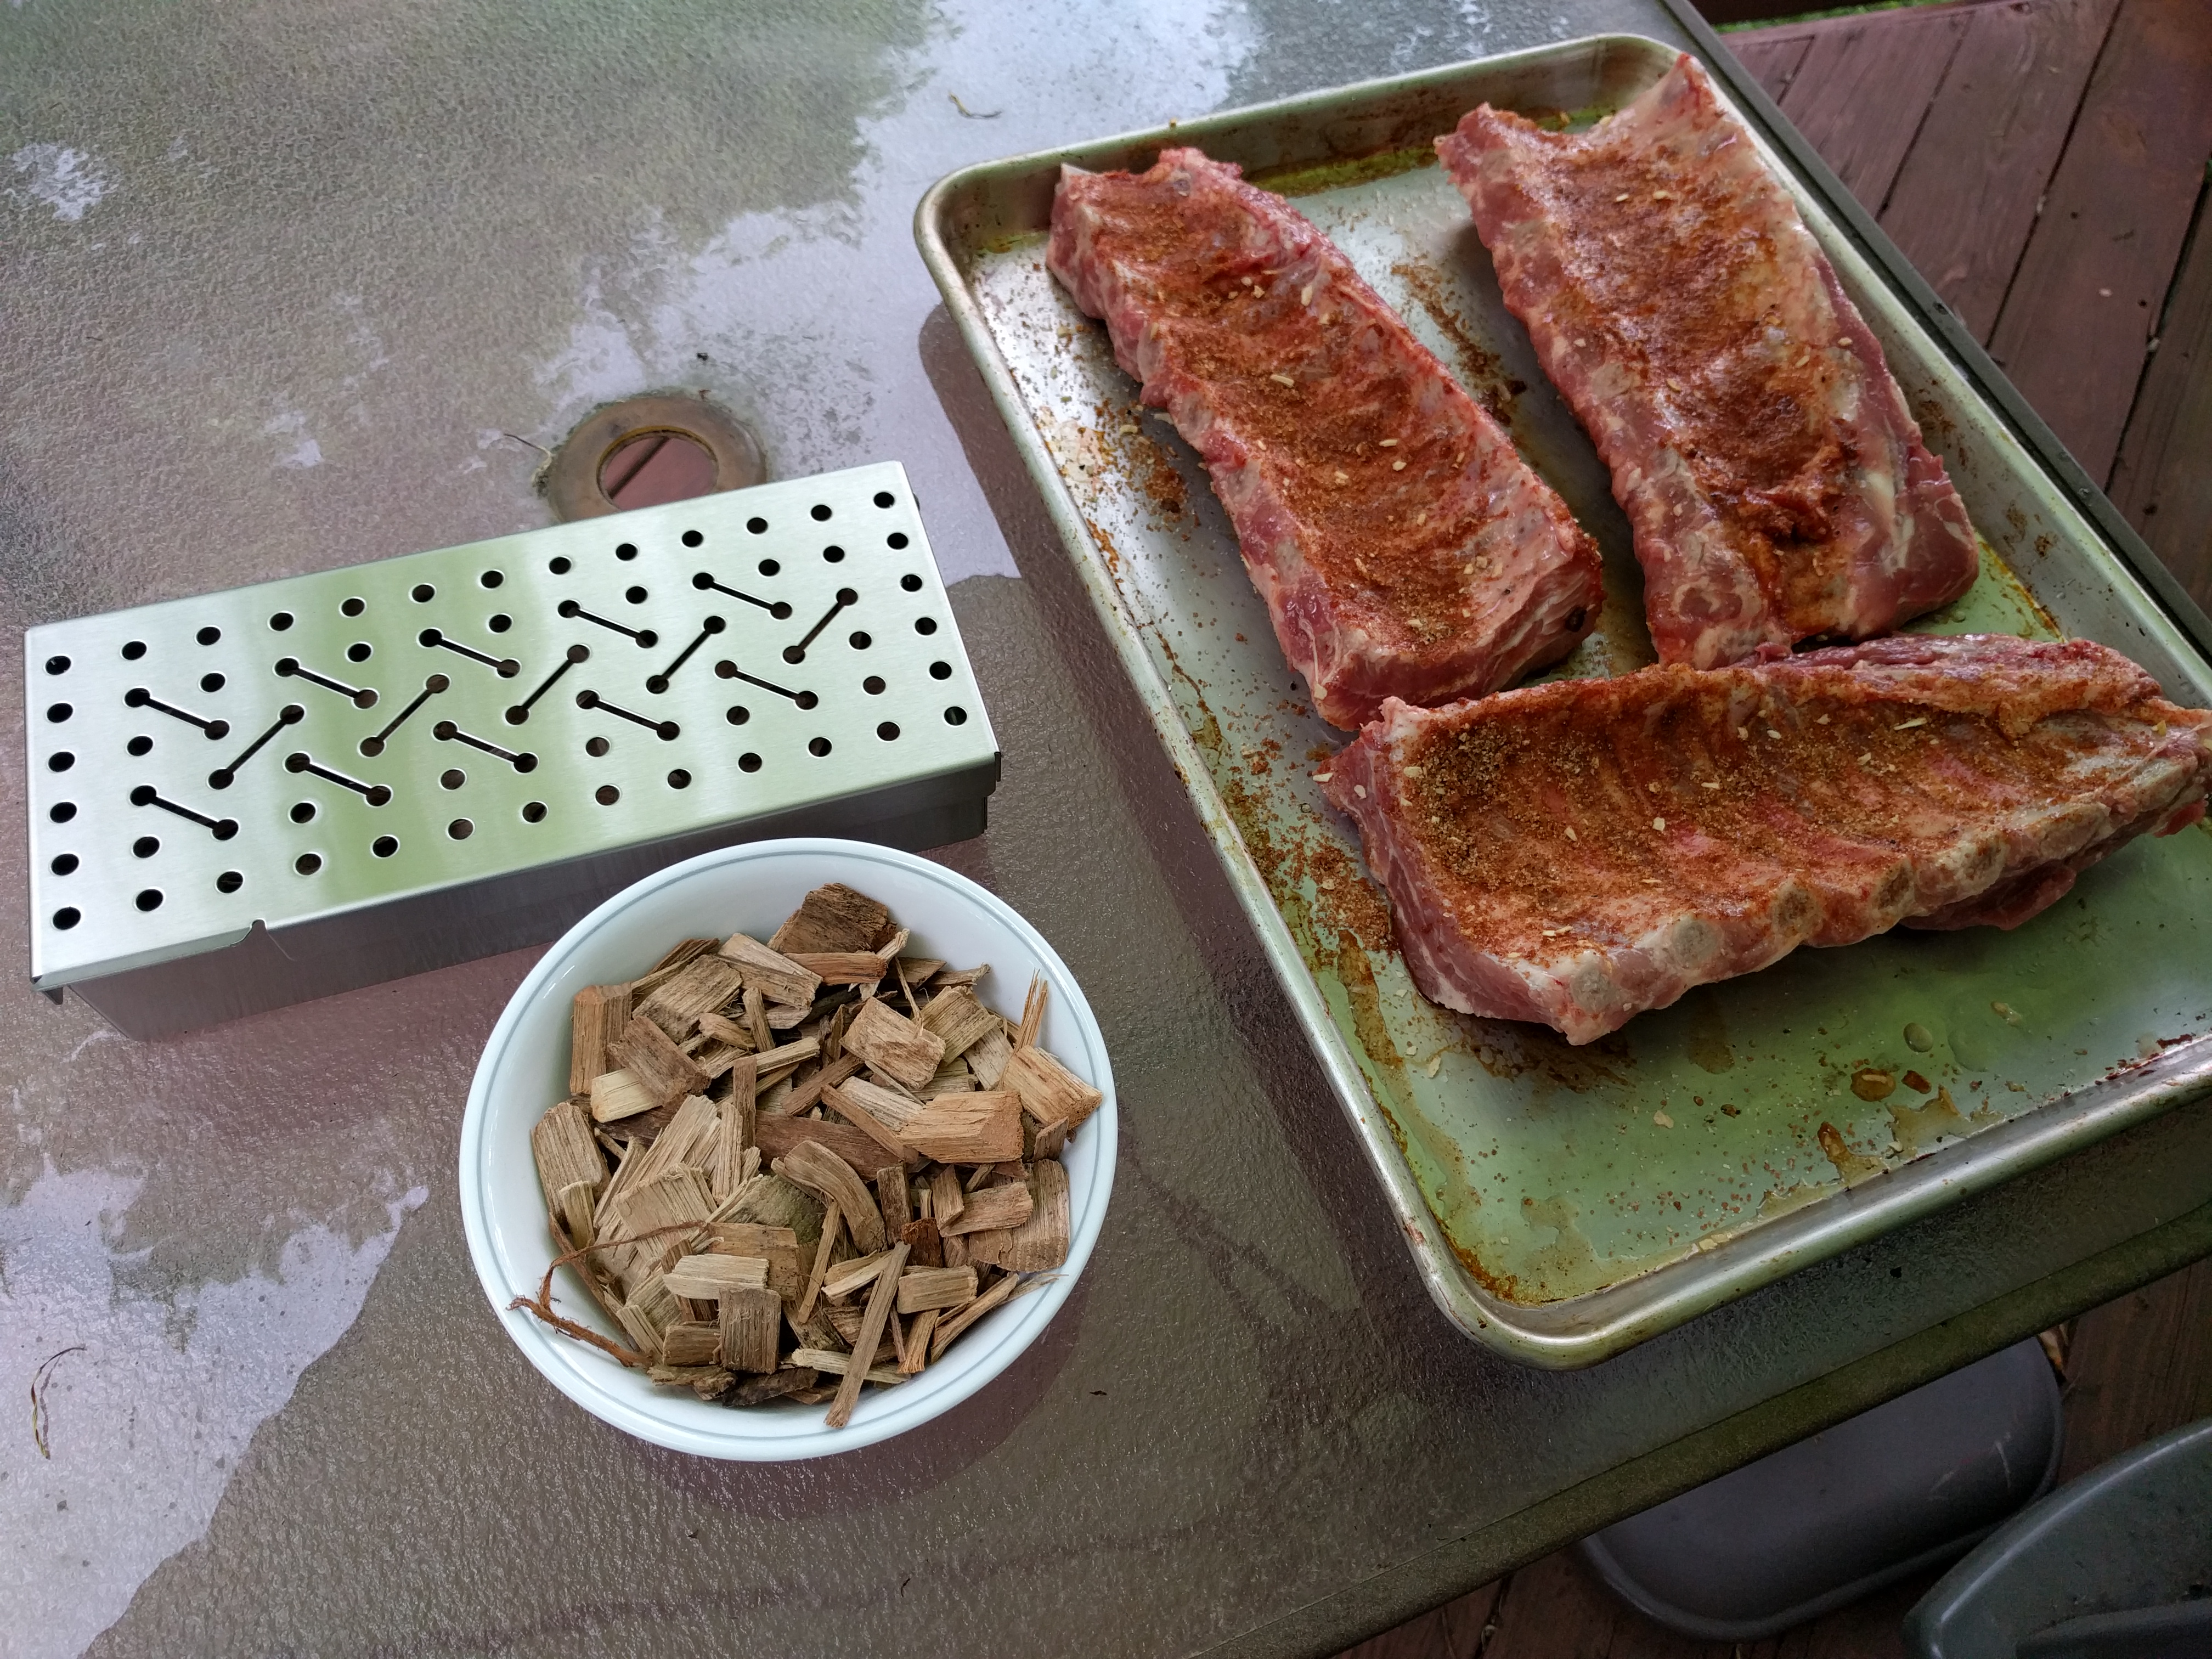 Ribs and wood chips